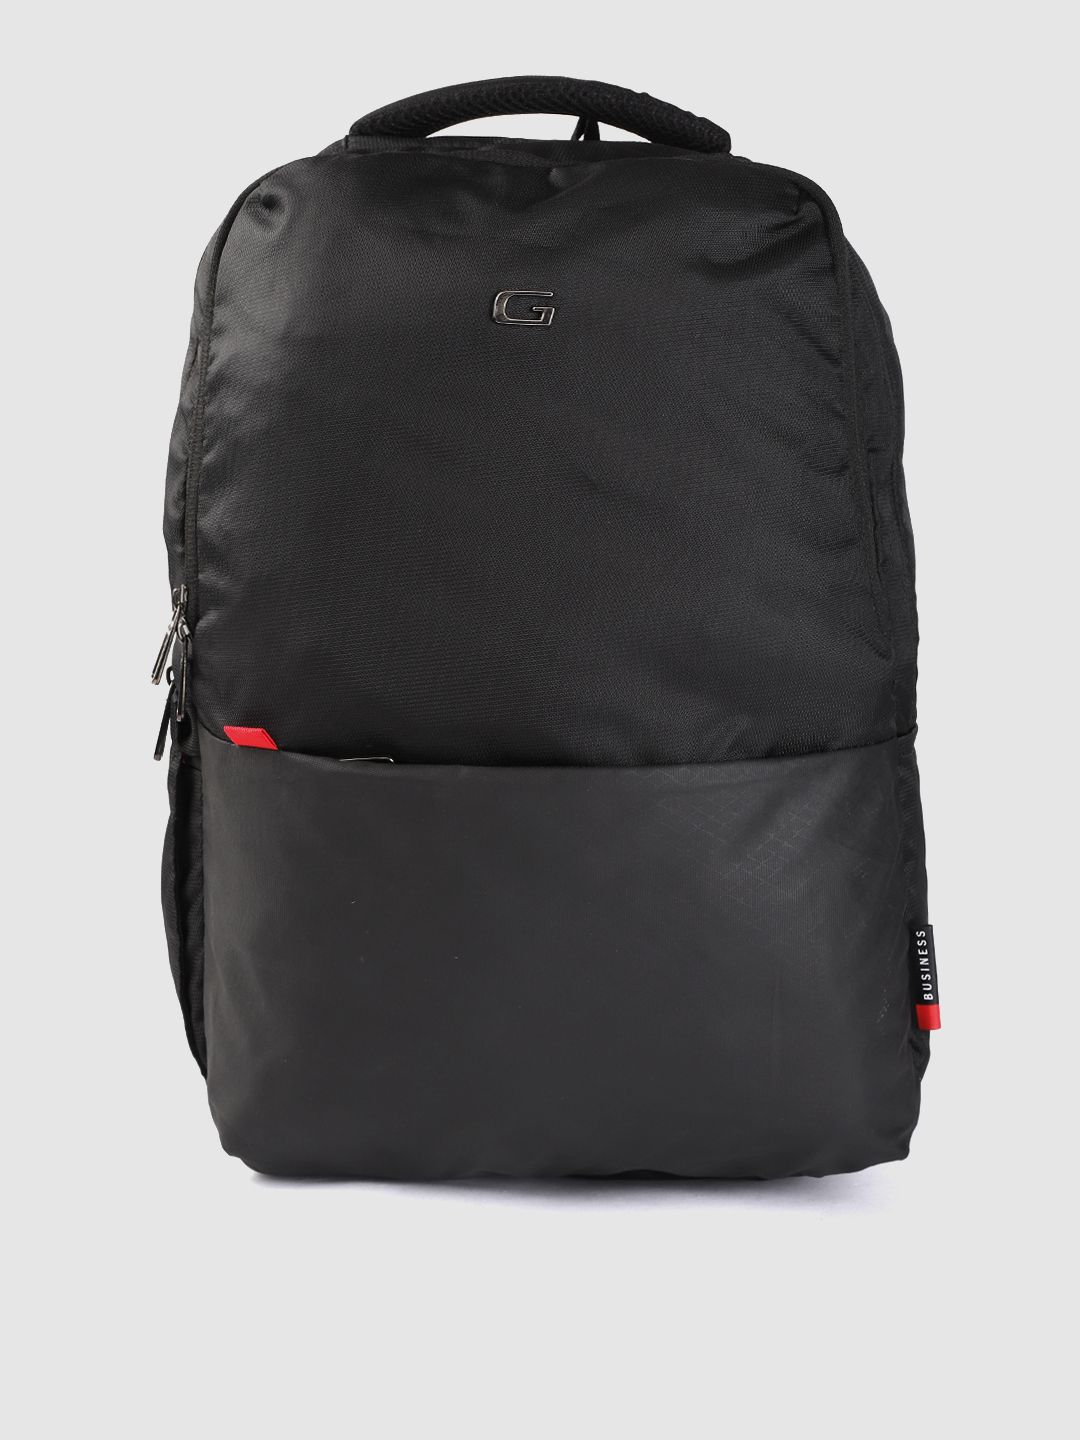 Gear Unisex Black Solid 16 Inch Laptop Backpack Price in India